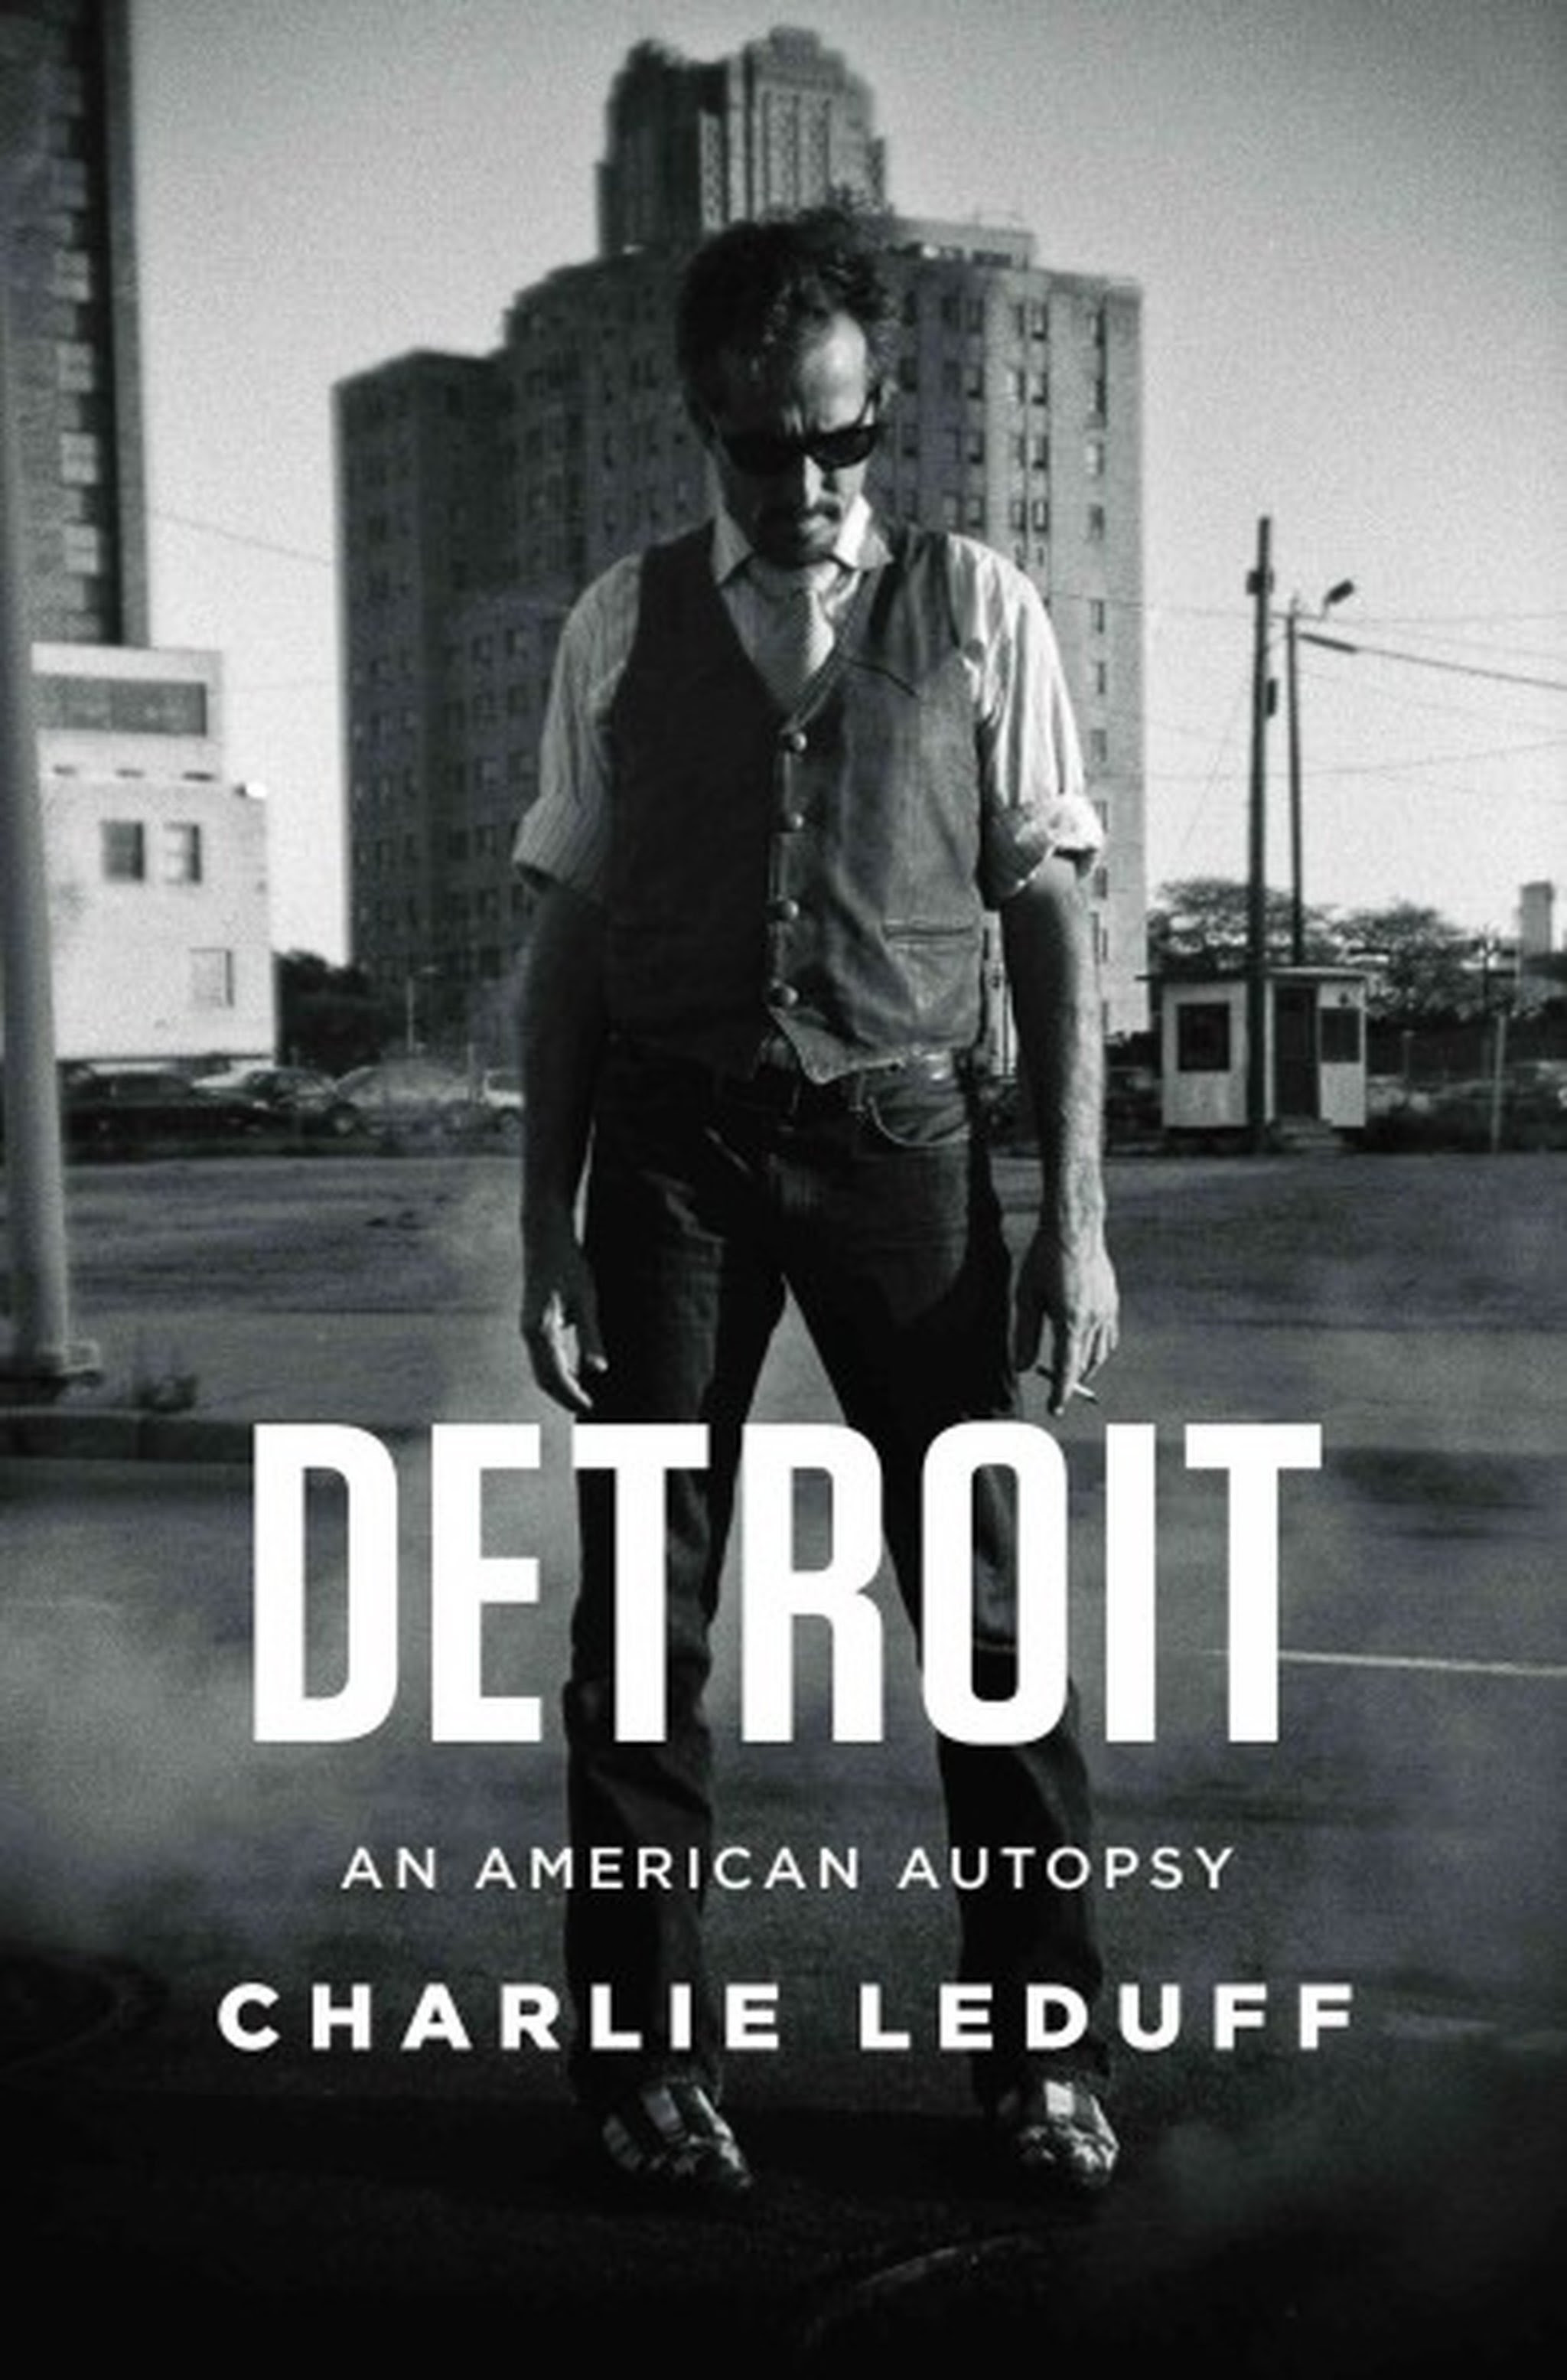 Image result for detroit an american autopsy